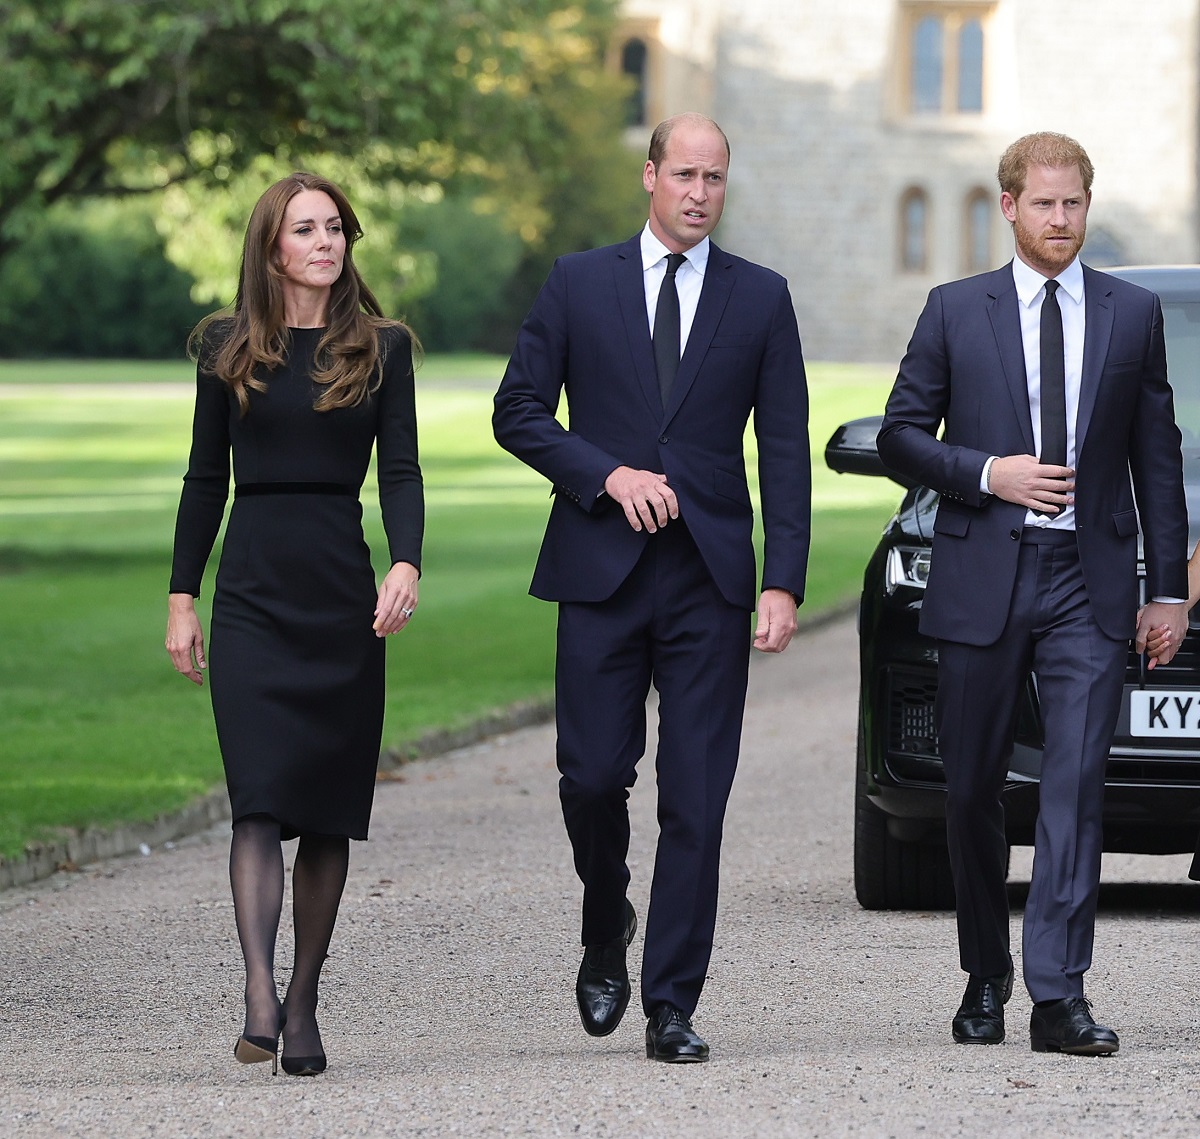 Kate Middleton, Prince William, and Prince Harry on the long Walk at Windsor Castle arrive to view flowers and tributes to Queen Elizabeth II